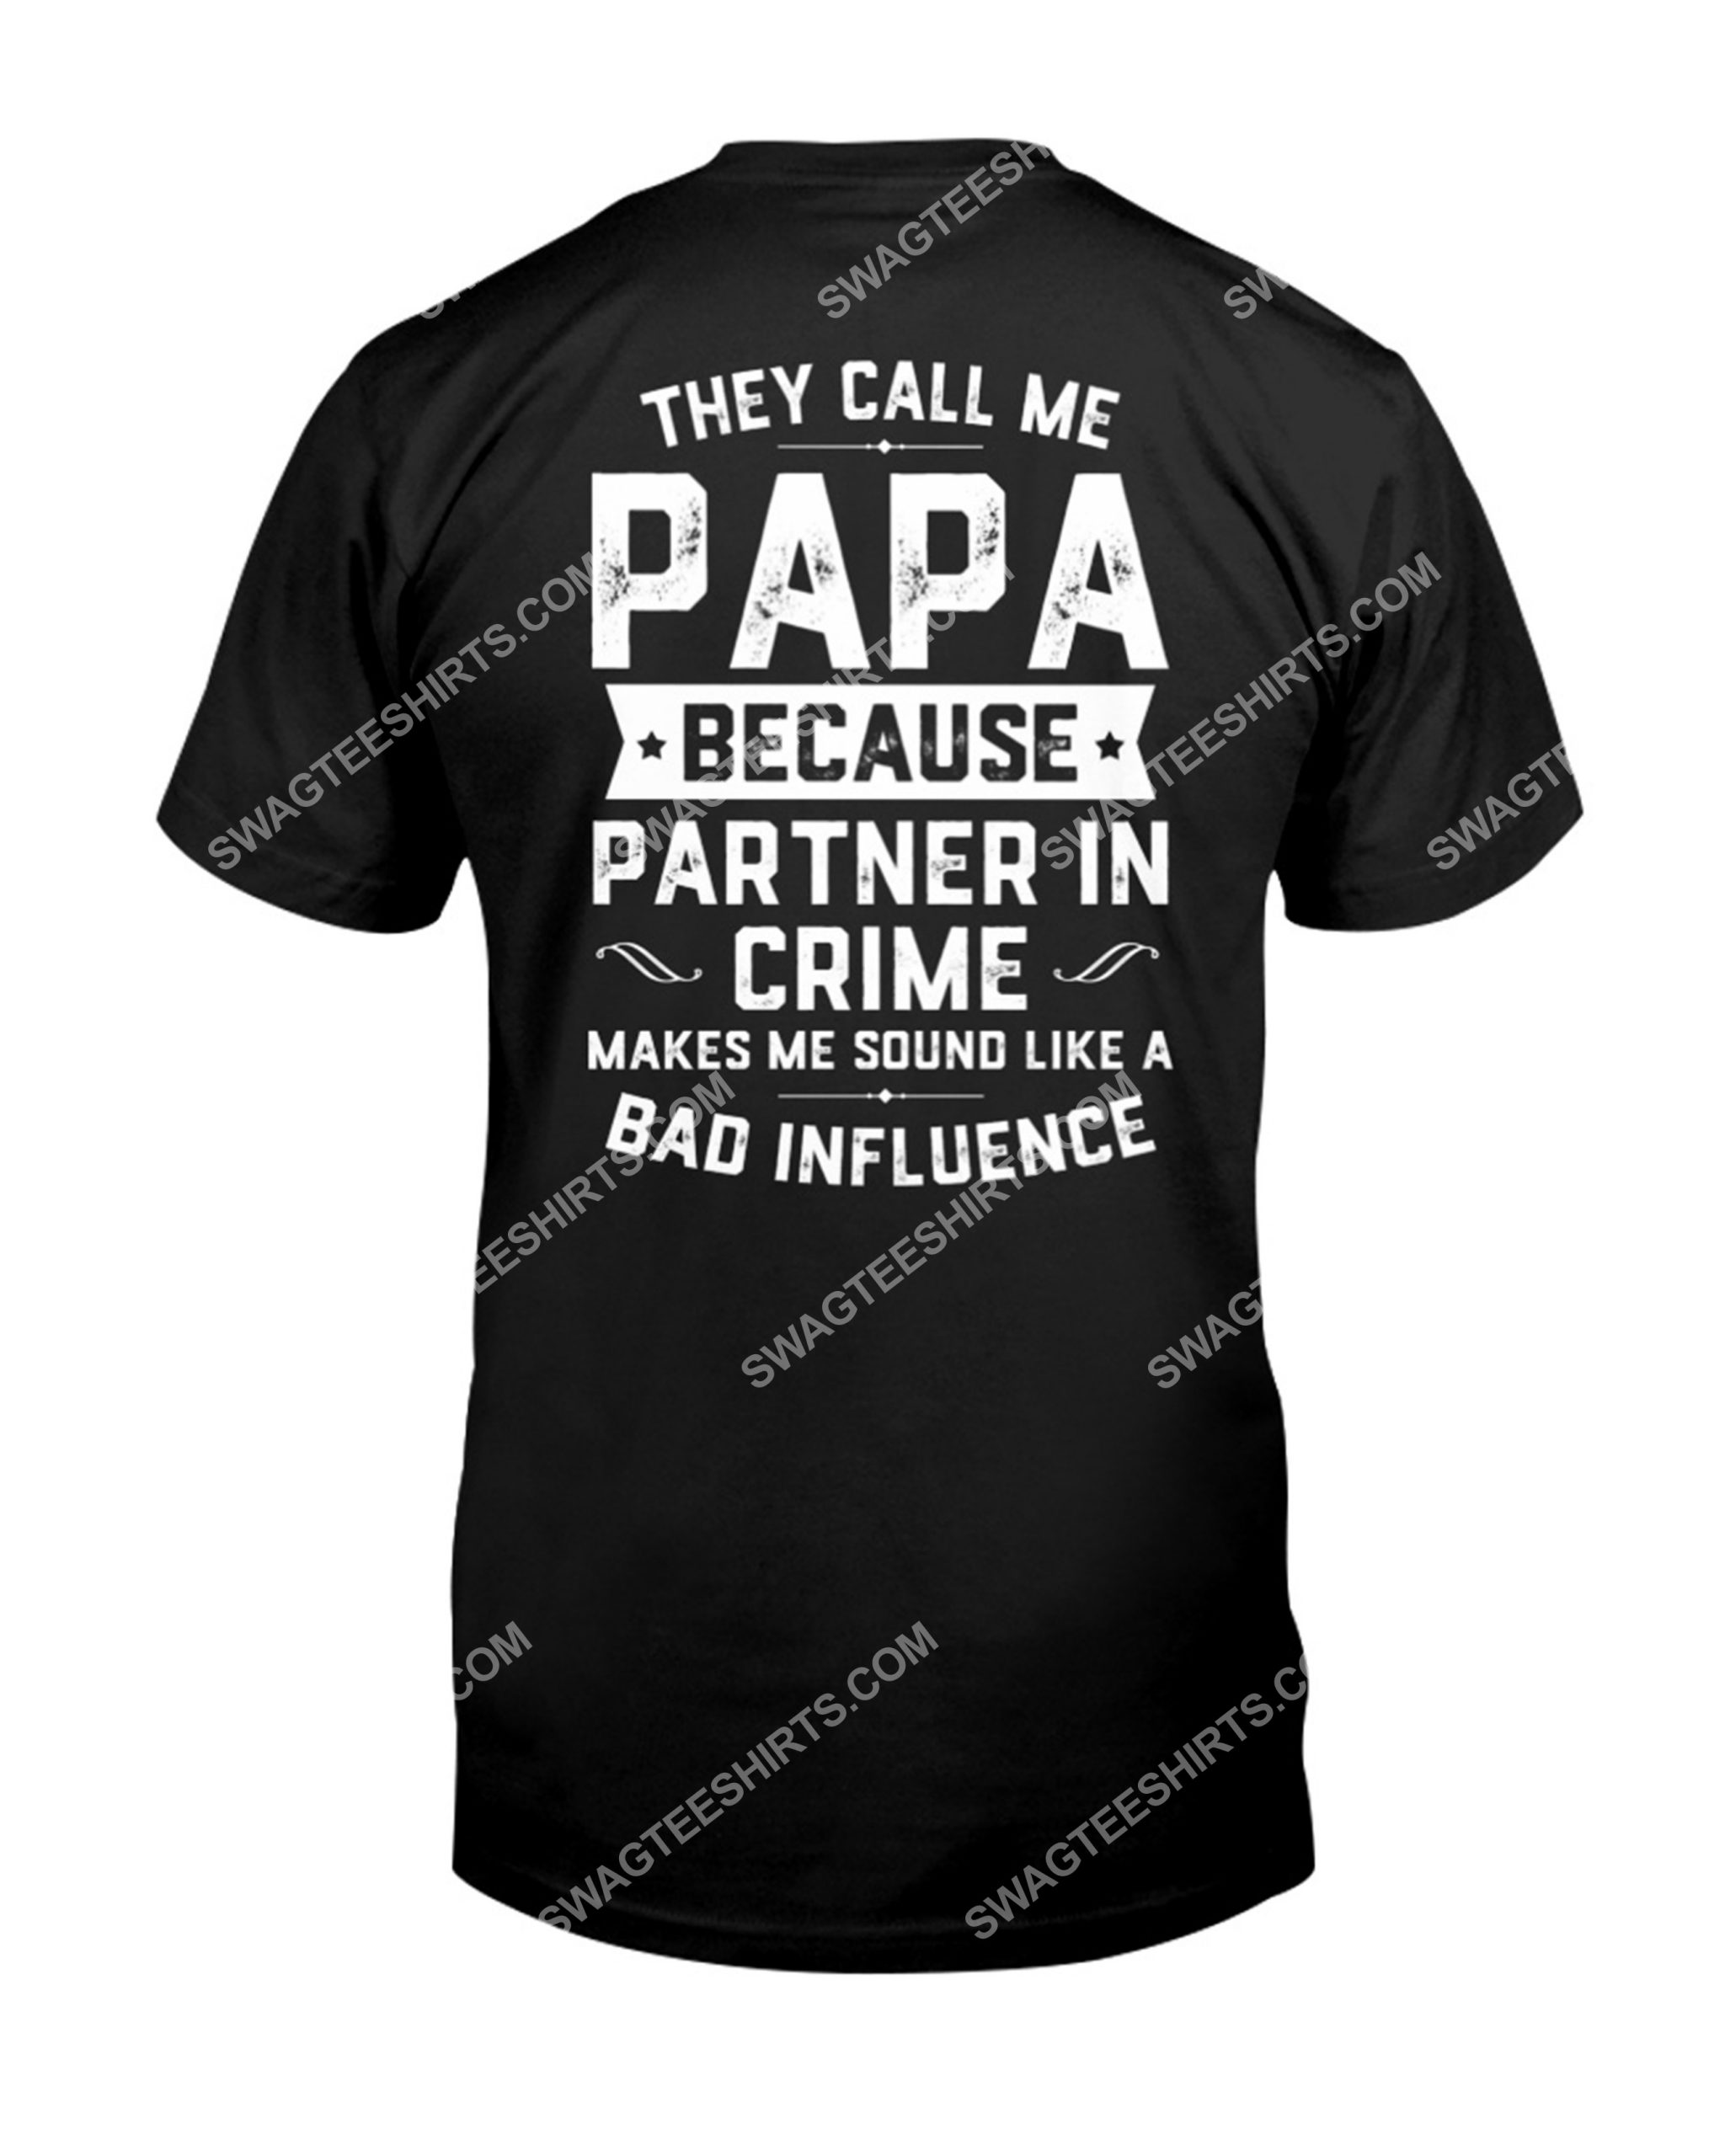 they call me papa because partner in crime makes me sound like a bad influence shirt 1(1)